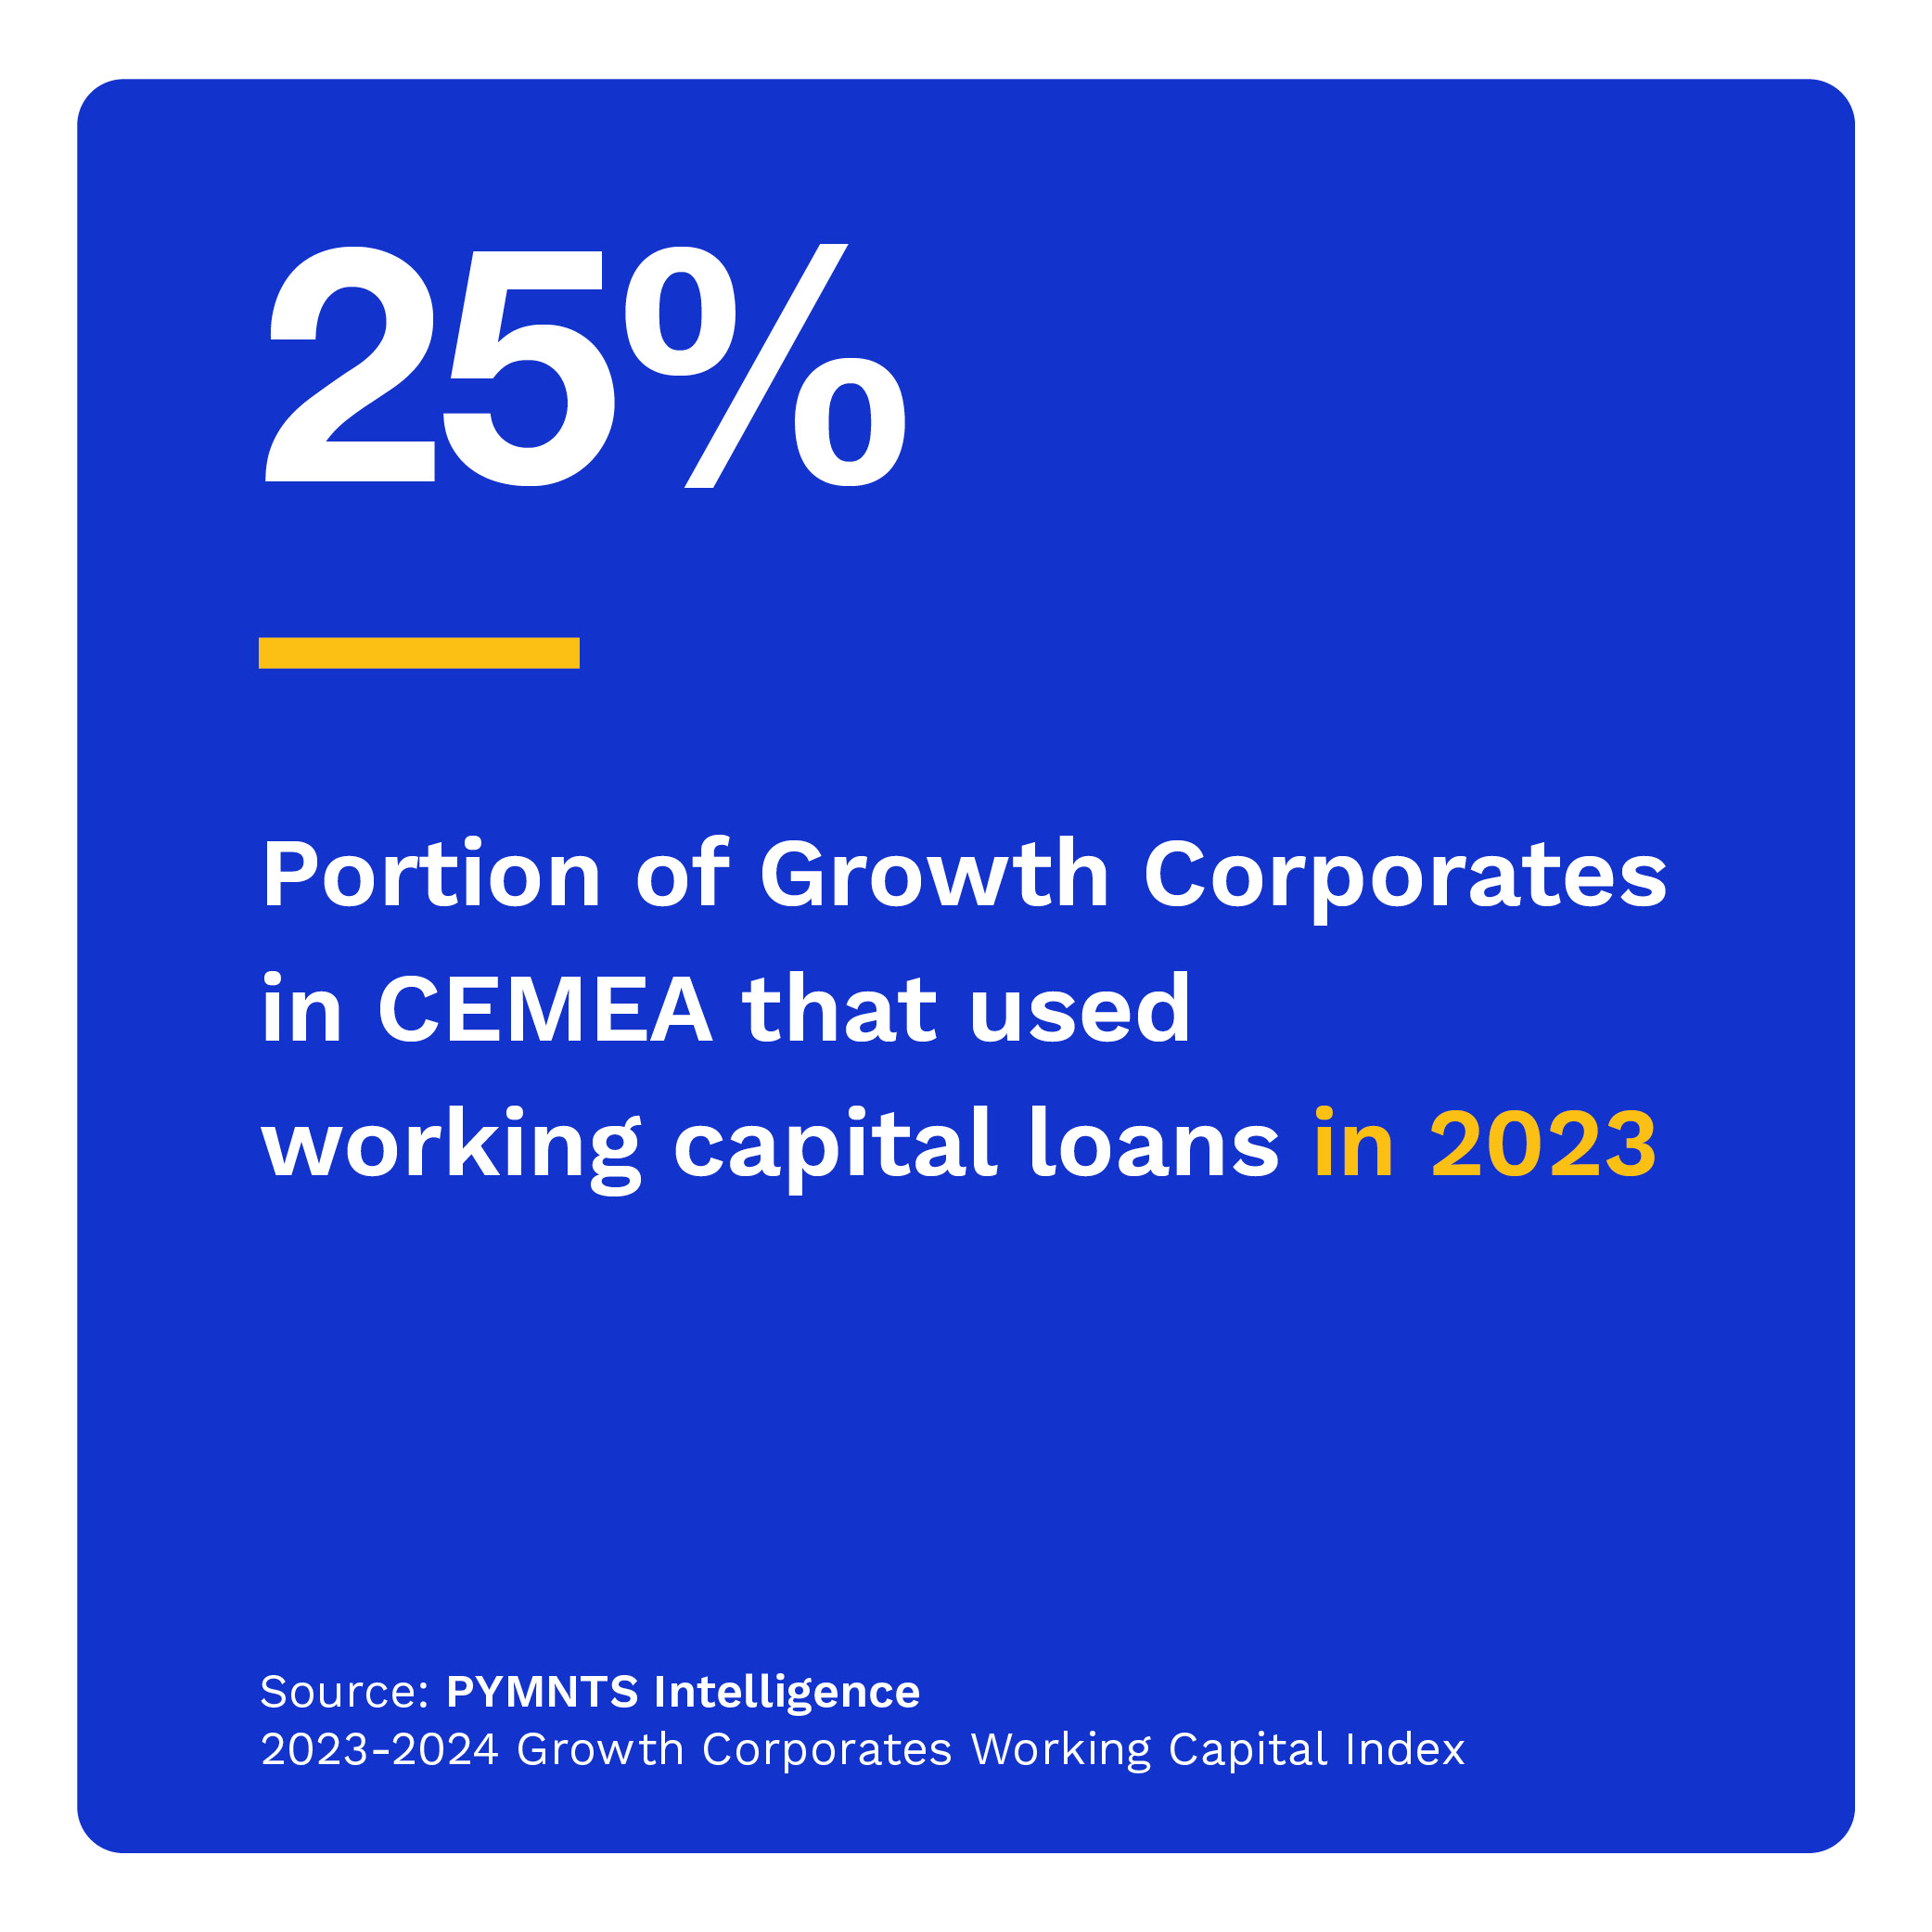  Portion of Growth Corporates in CEMEA that used working capital loans in 2023 